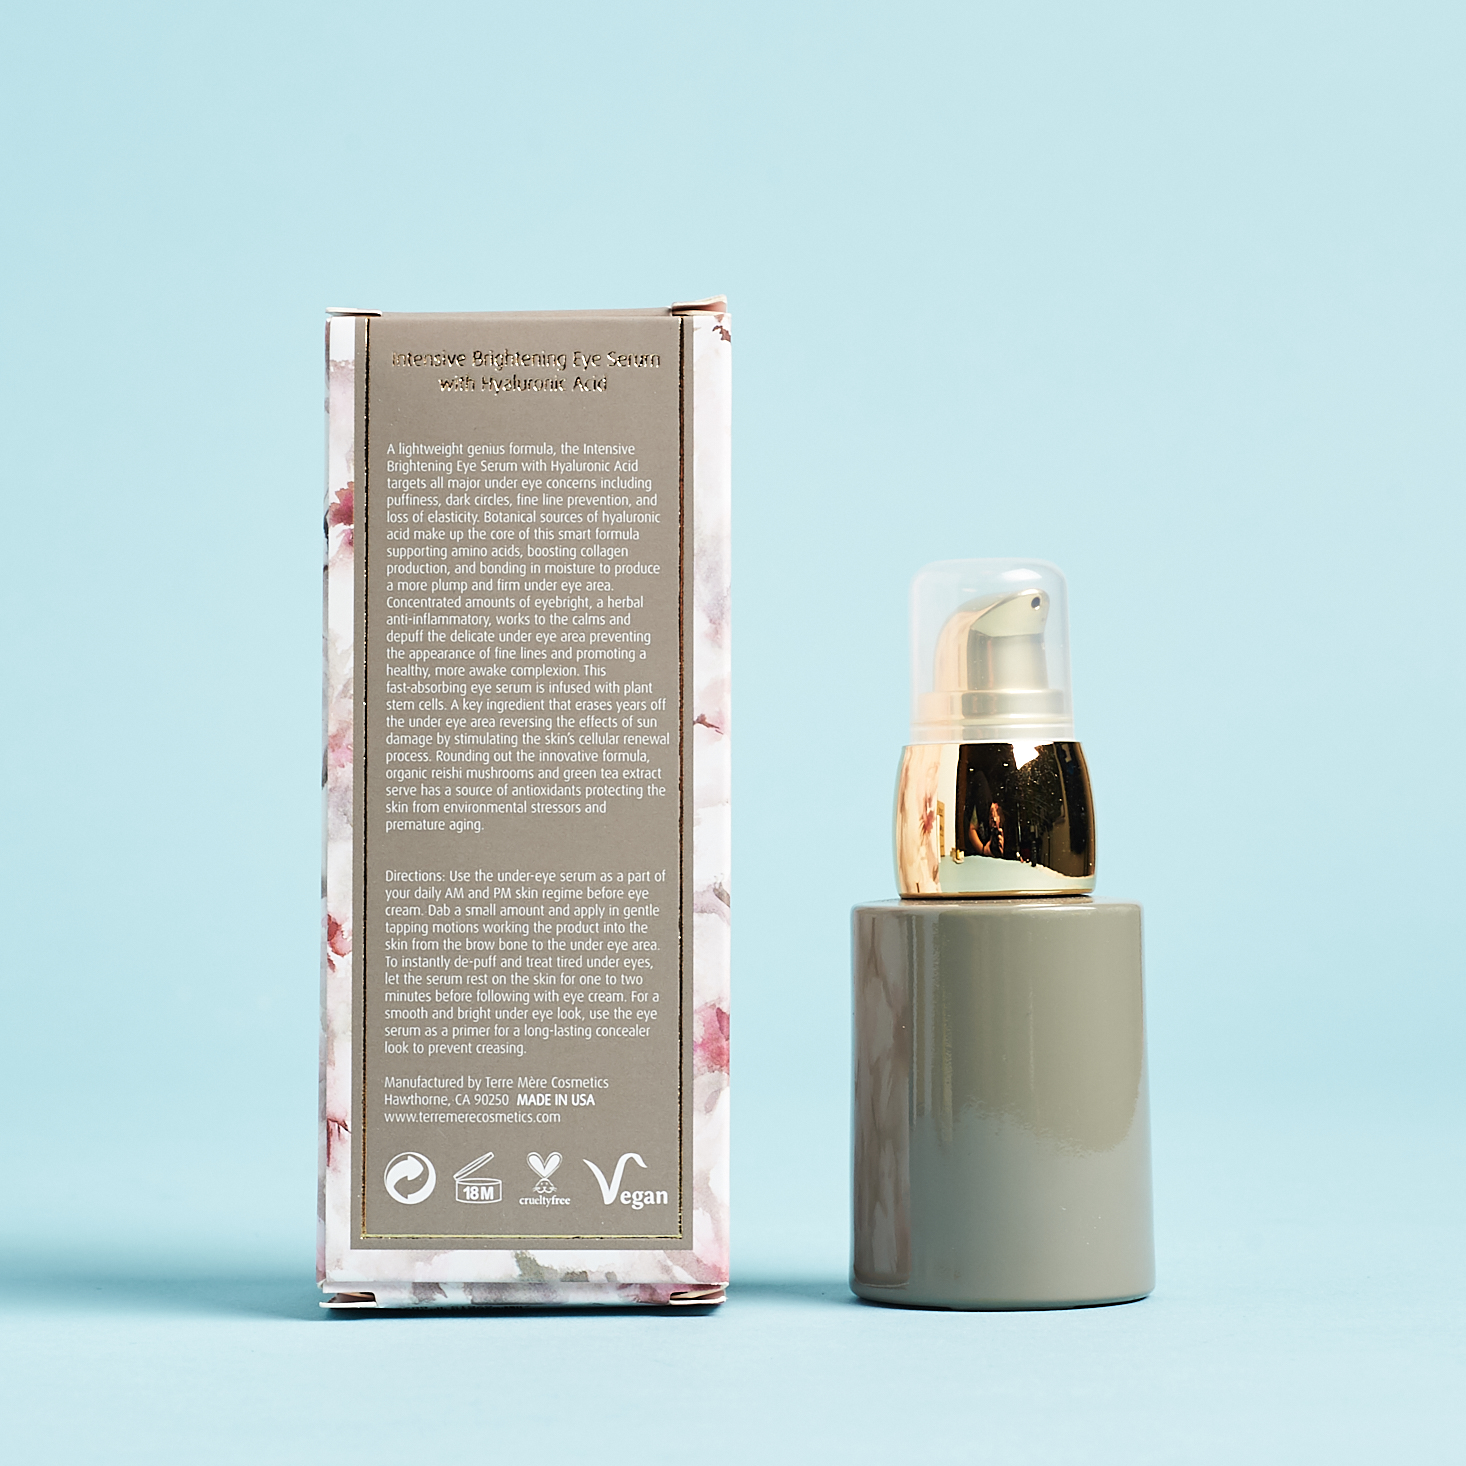 back of the serum bottle and box with additional product info